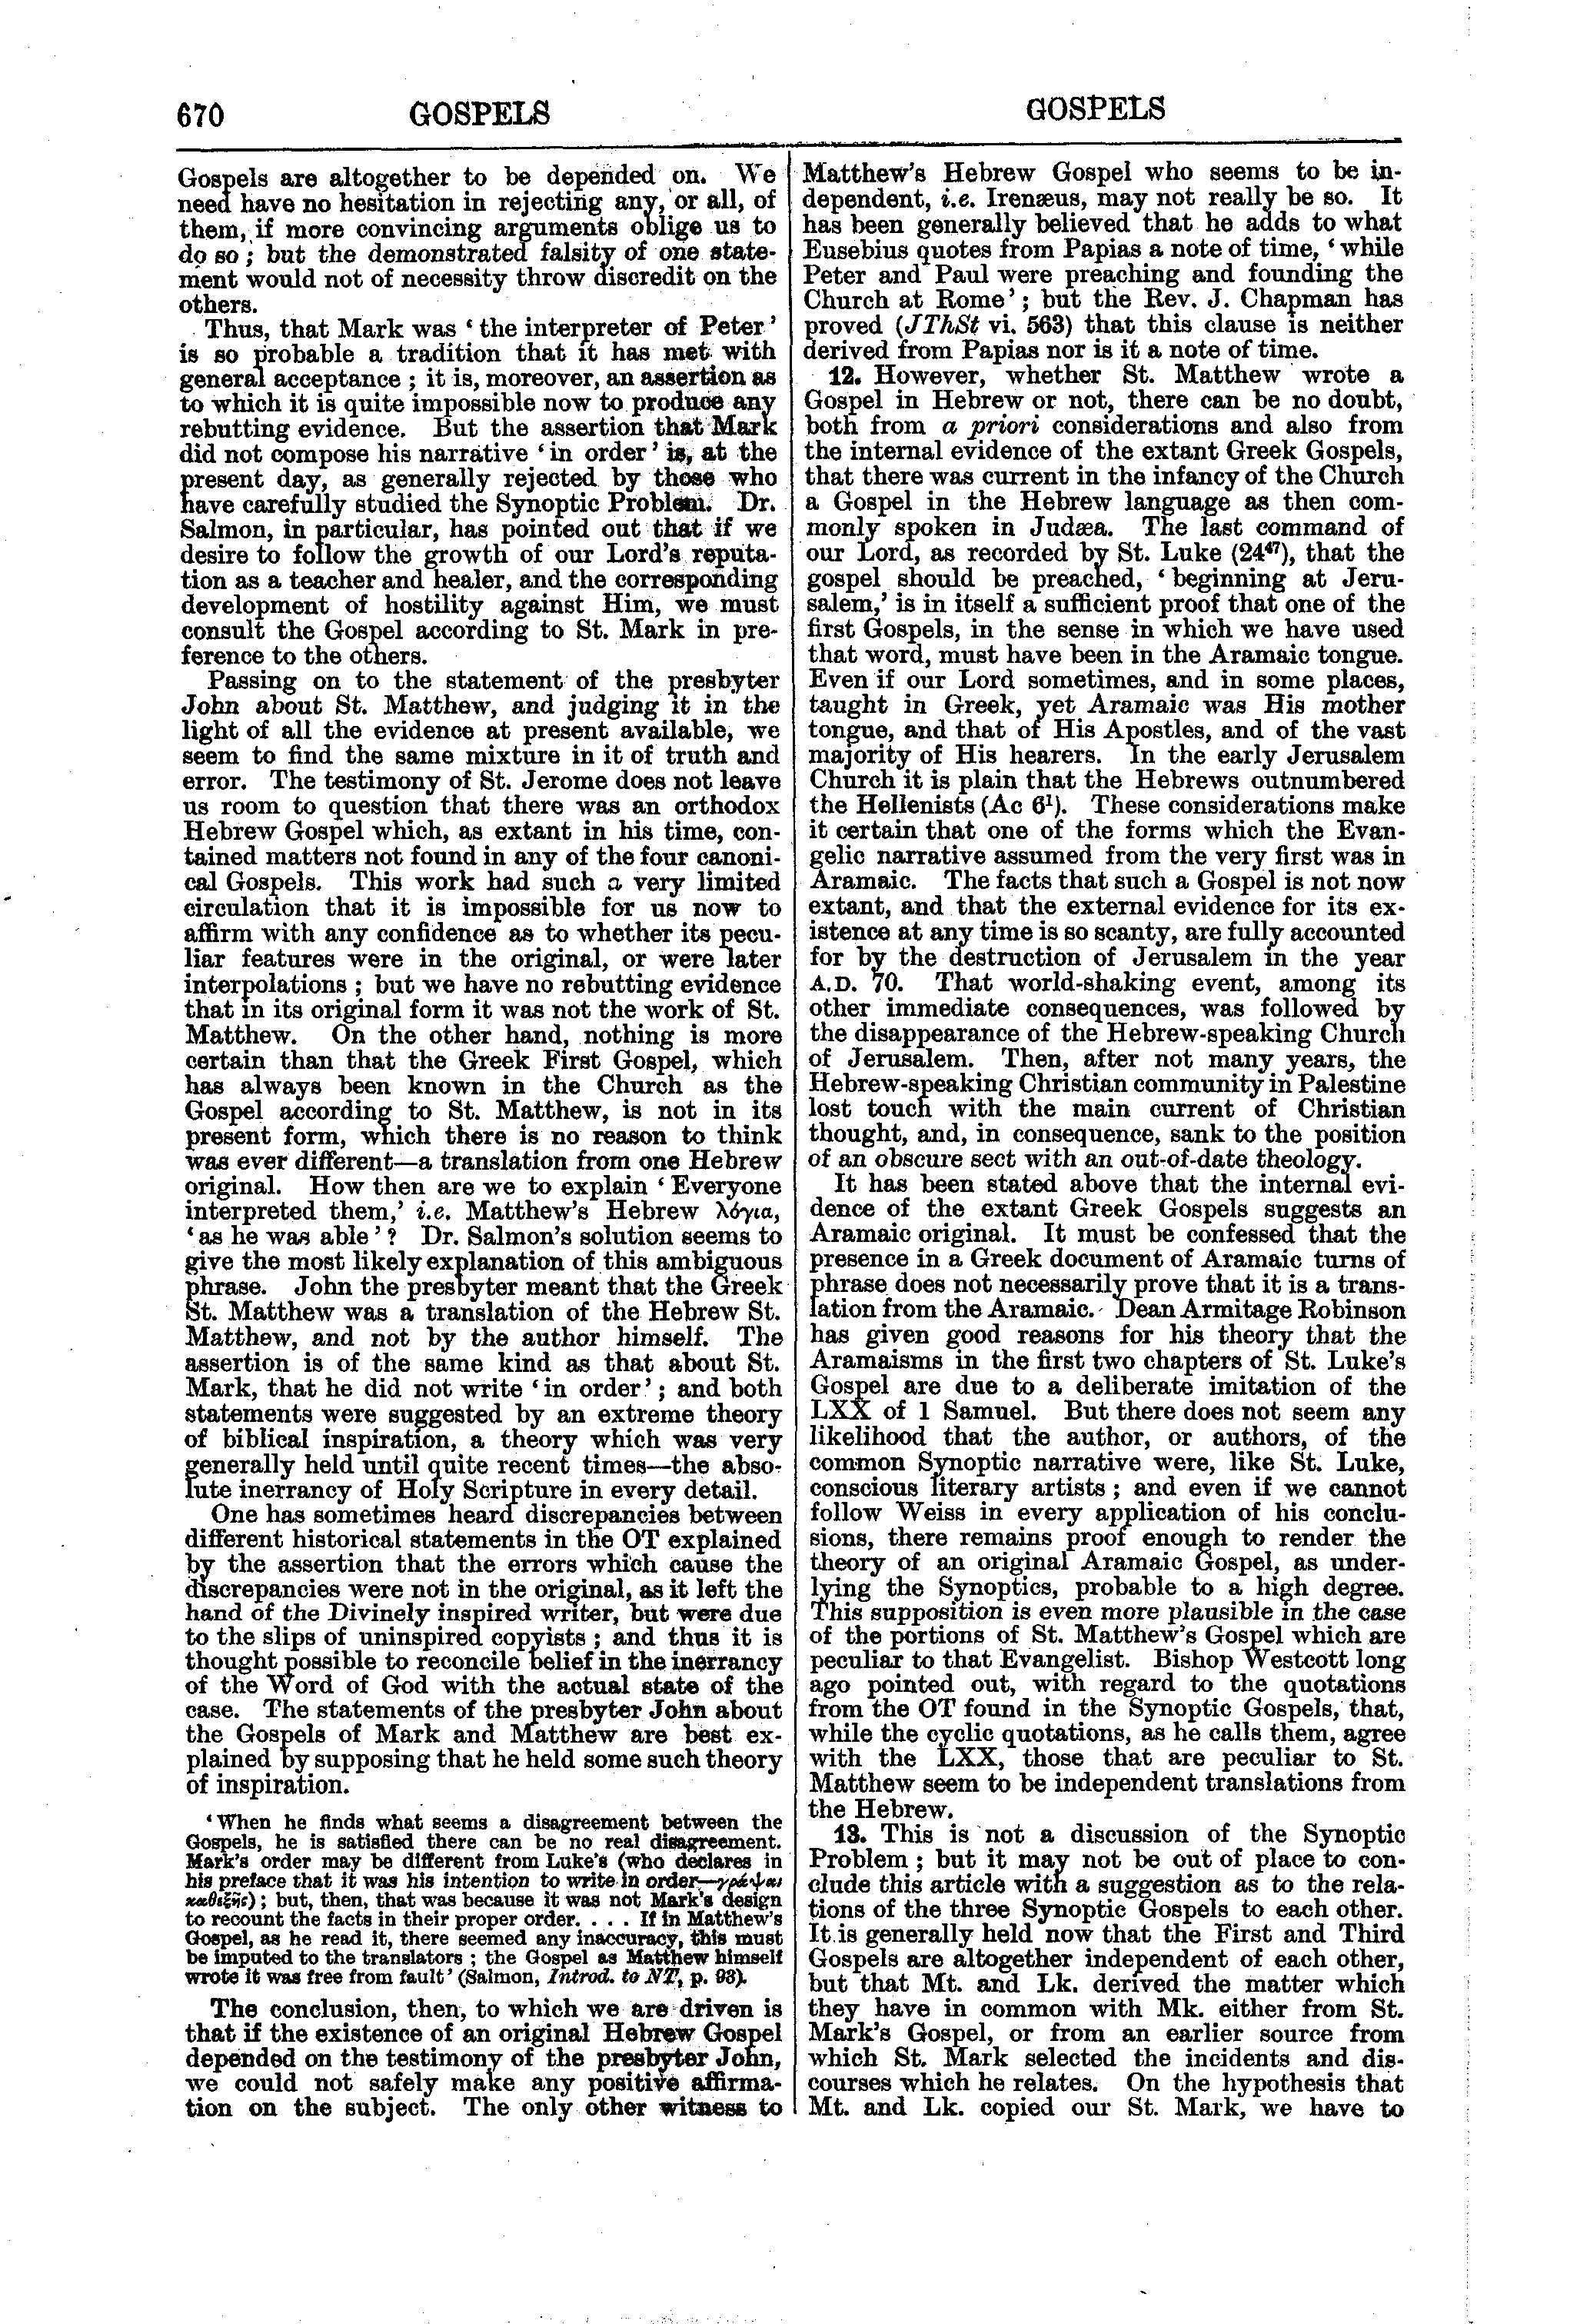 Image of page 670